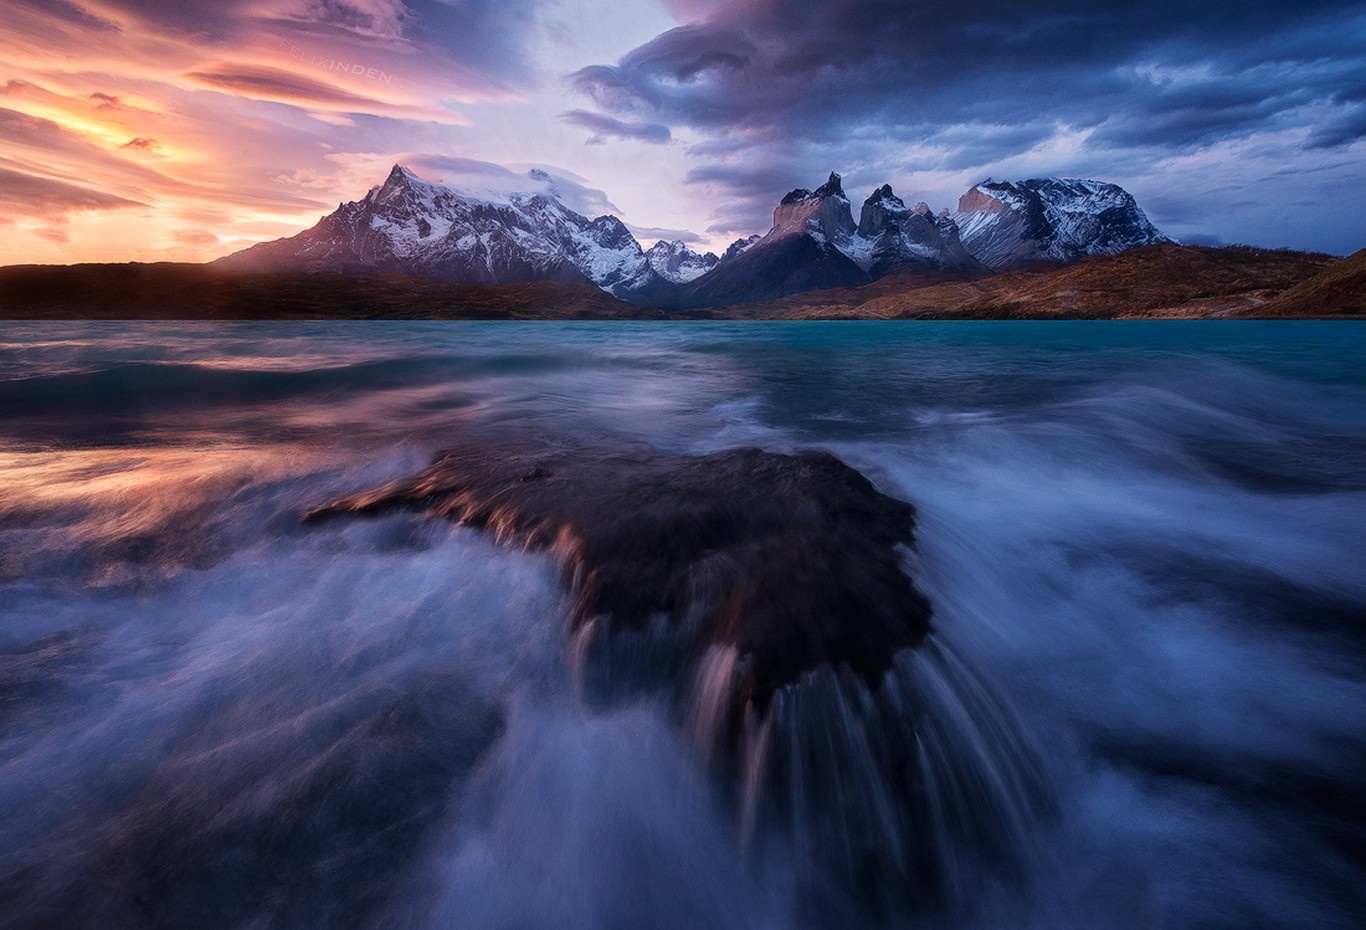 Sunset Mountains Torres Del Paine Lake Snowy Peak Clouds Waterfall Wind Water Chile Patagonia Landsc 1366x930